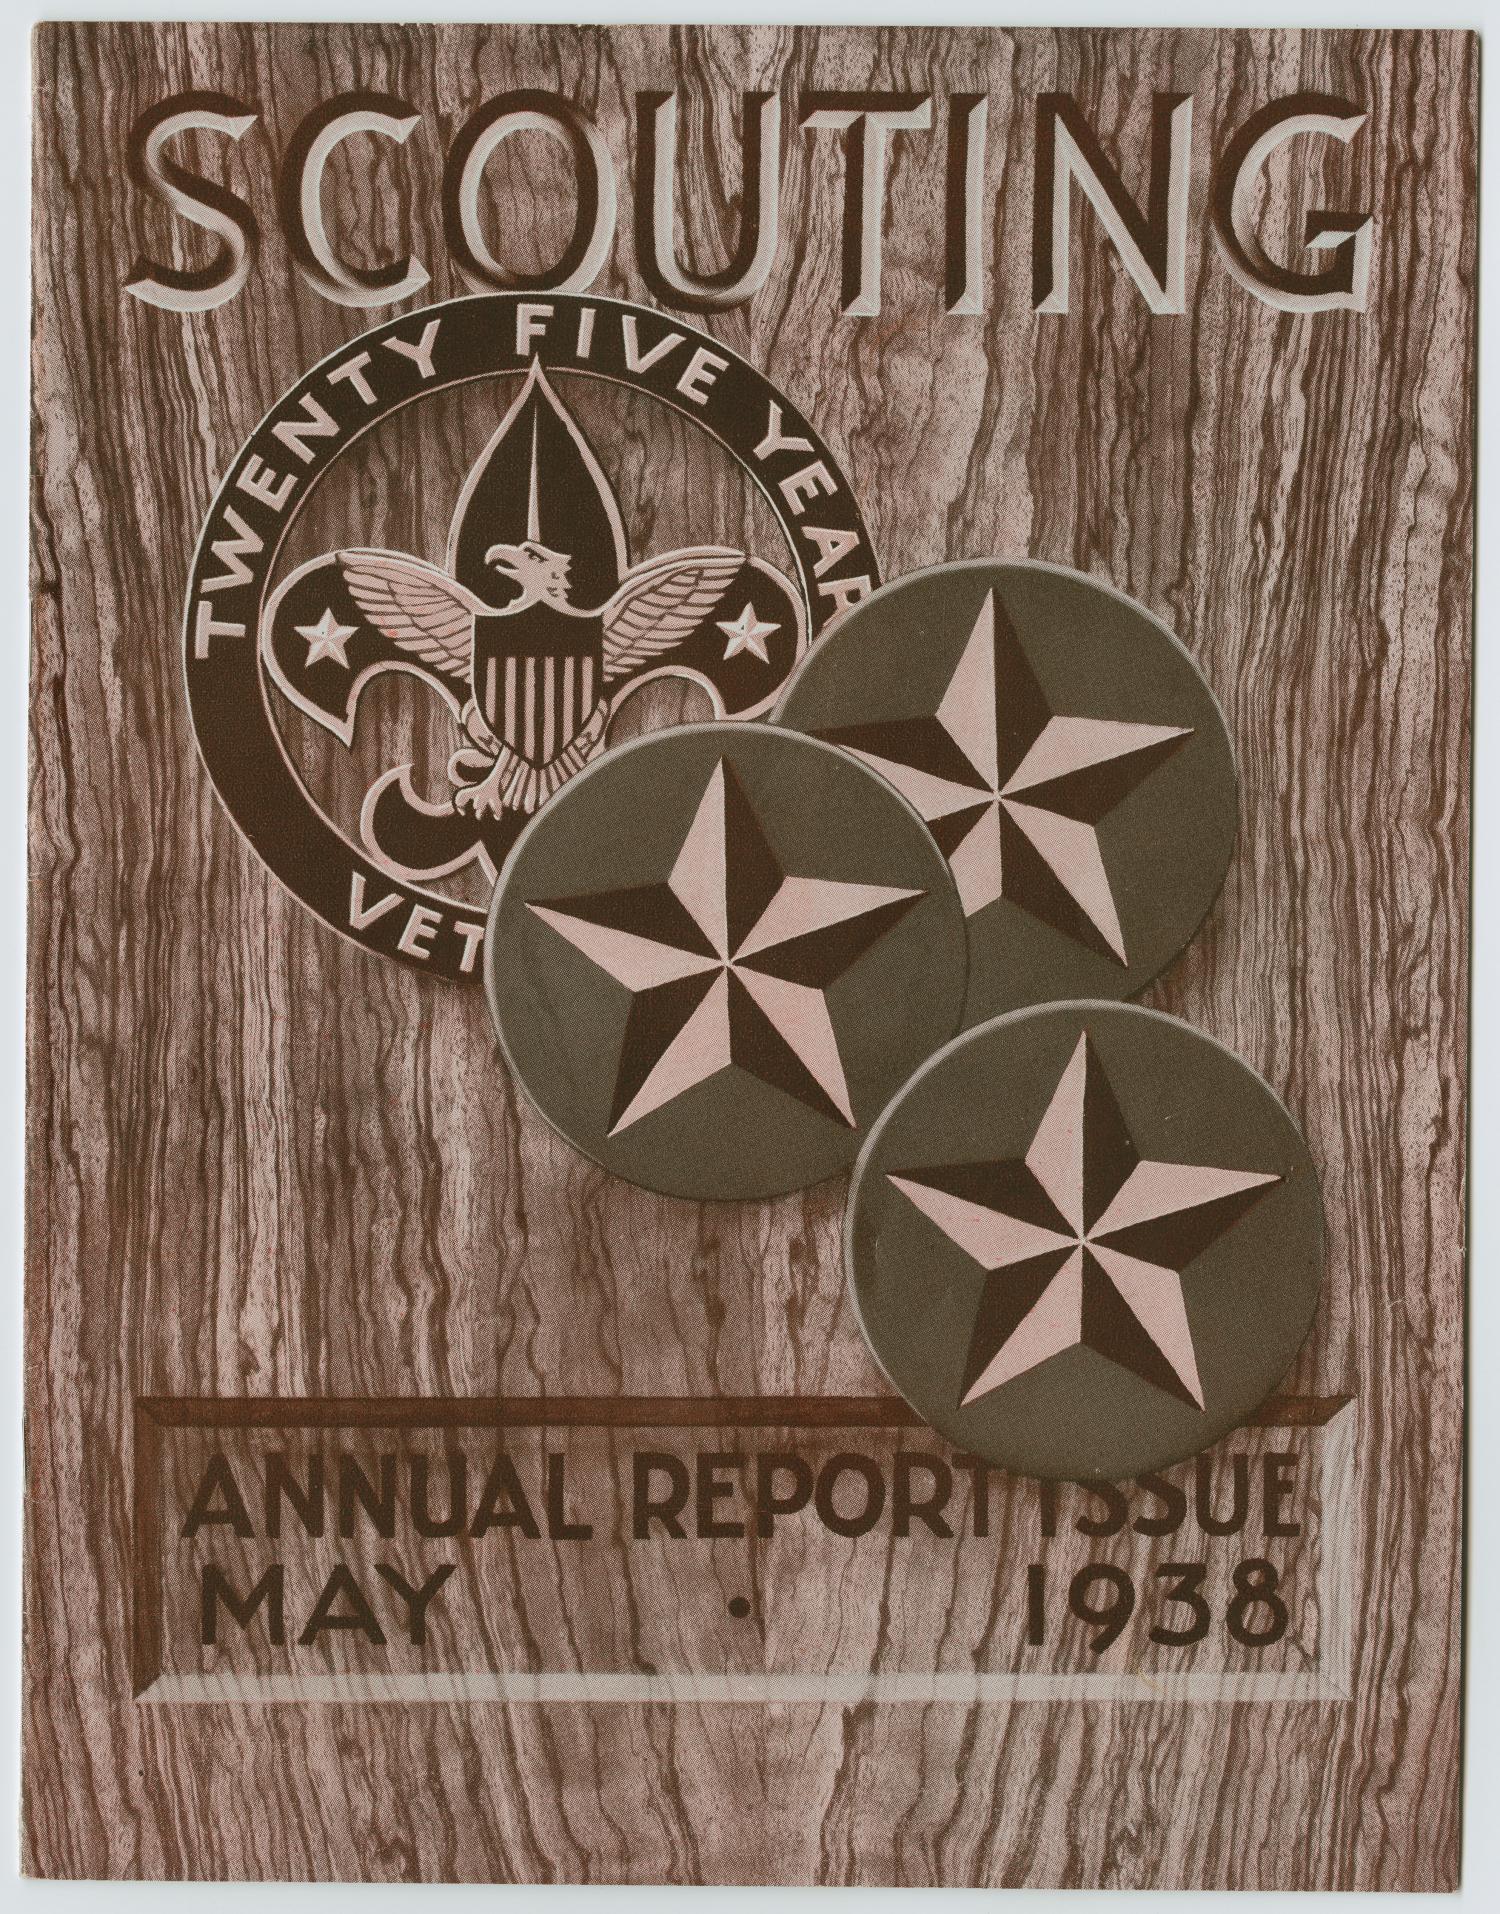 Scouting, Volume 26, Number 5, May 1938
                                                
                                                    1
                                                